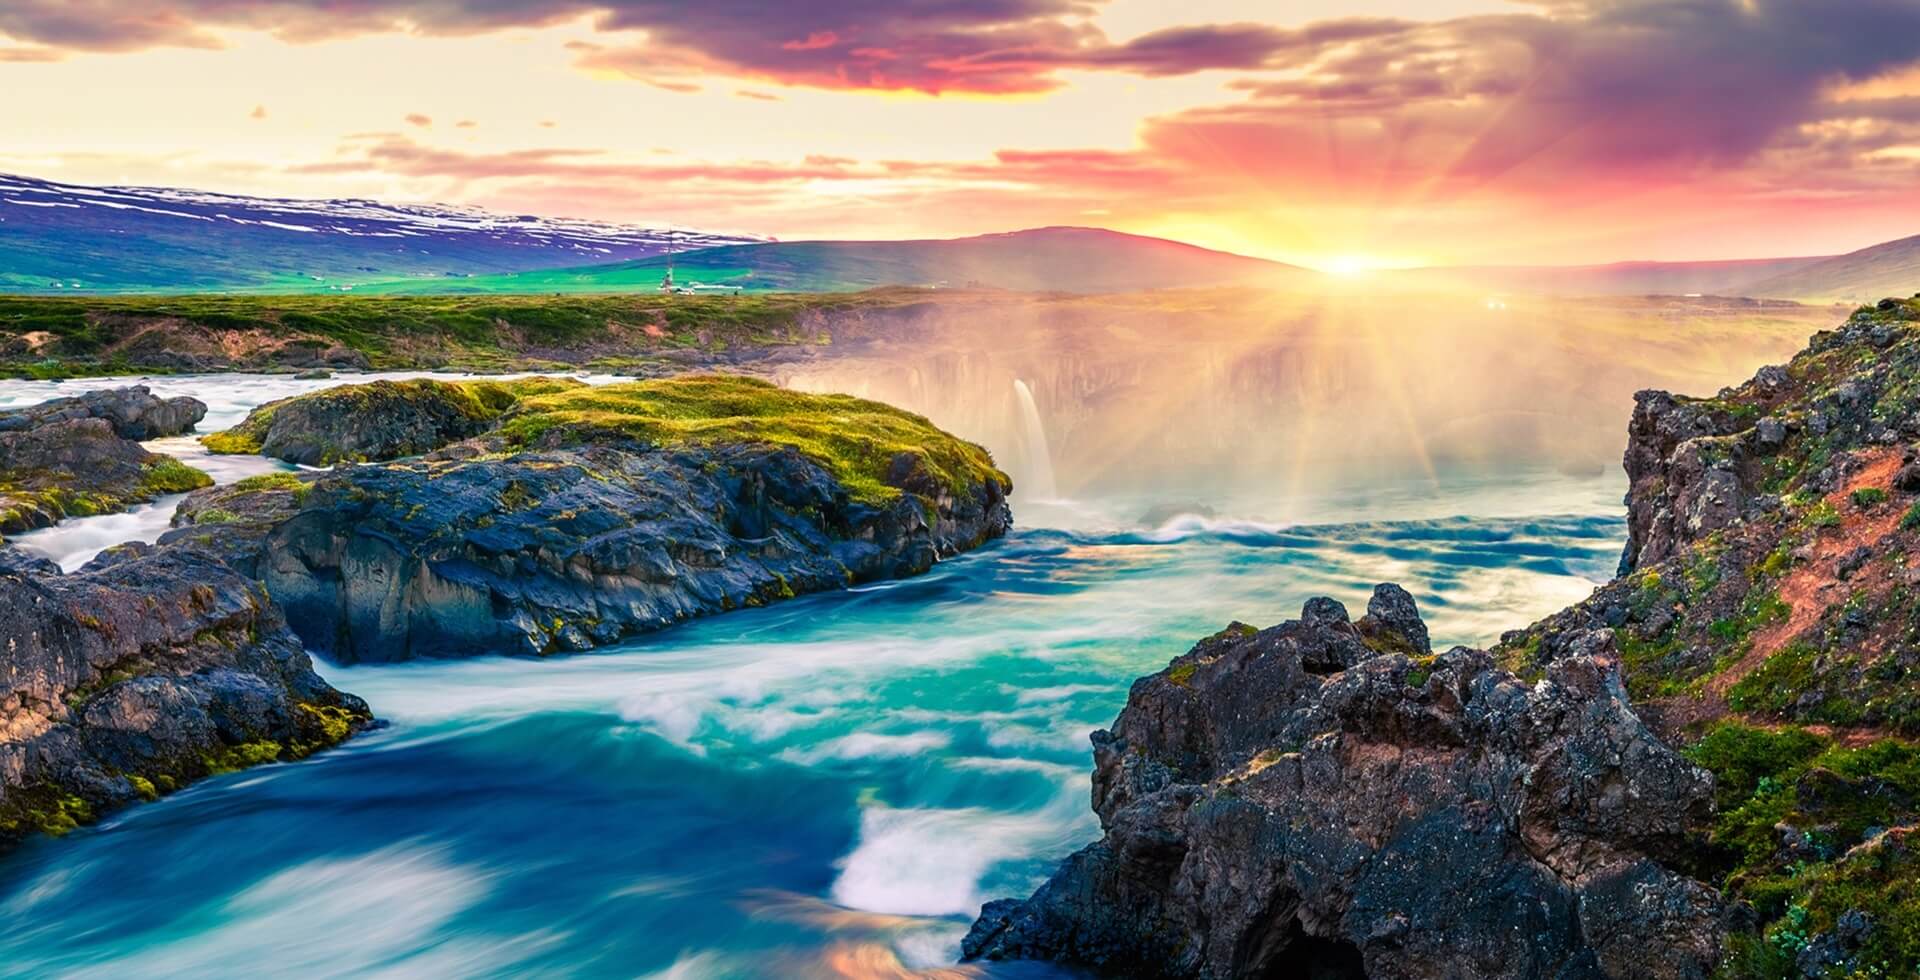 Footer Picturesque summer morning scene on the Godafoss Waterfall. ColorFooter ful sunrise on the on Skjalfandafljot river, Iceland, Europe. Artistic style post processed photo.